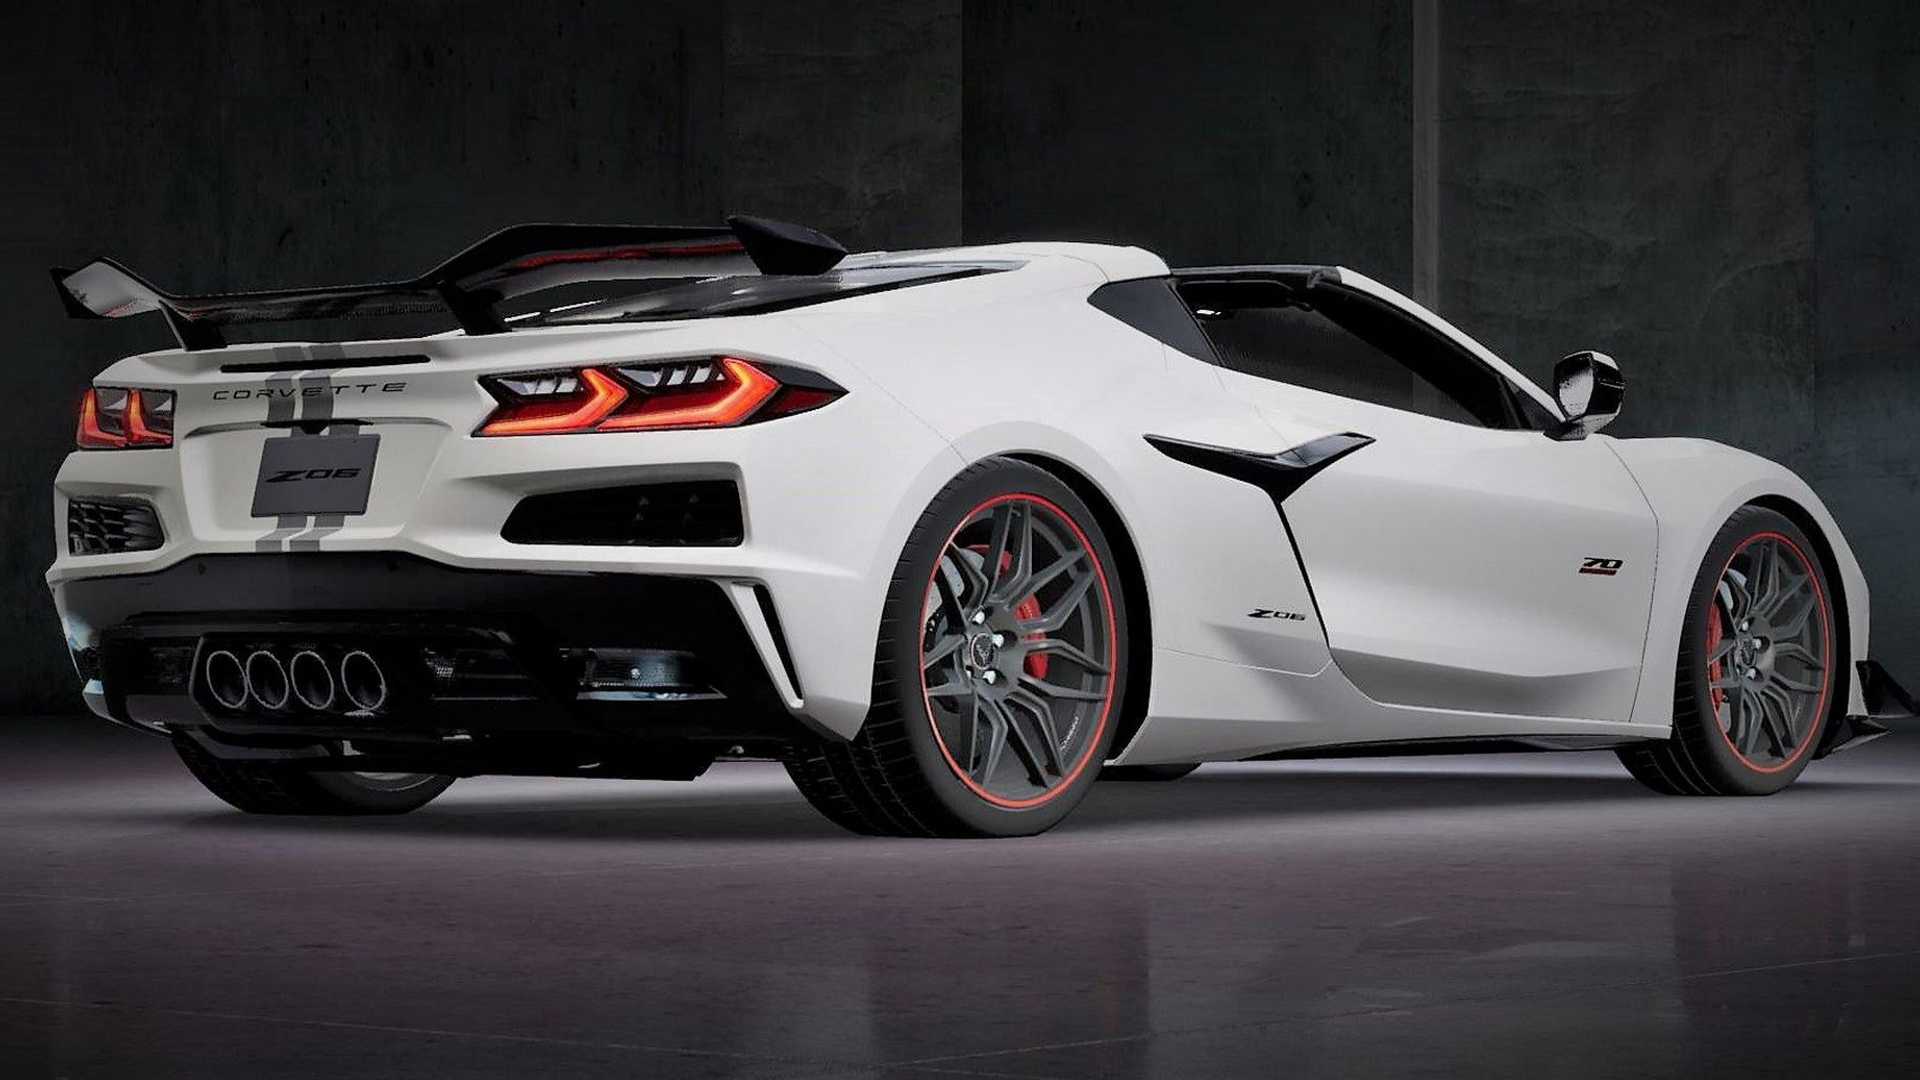 Introducing the 70th Anniversary Edition Corvette